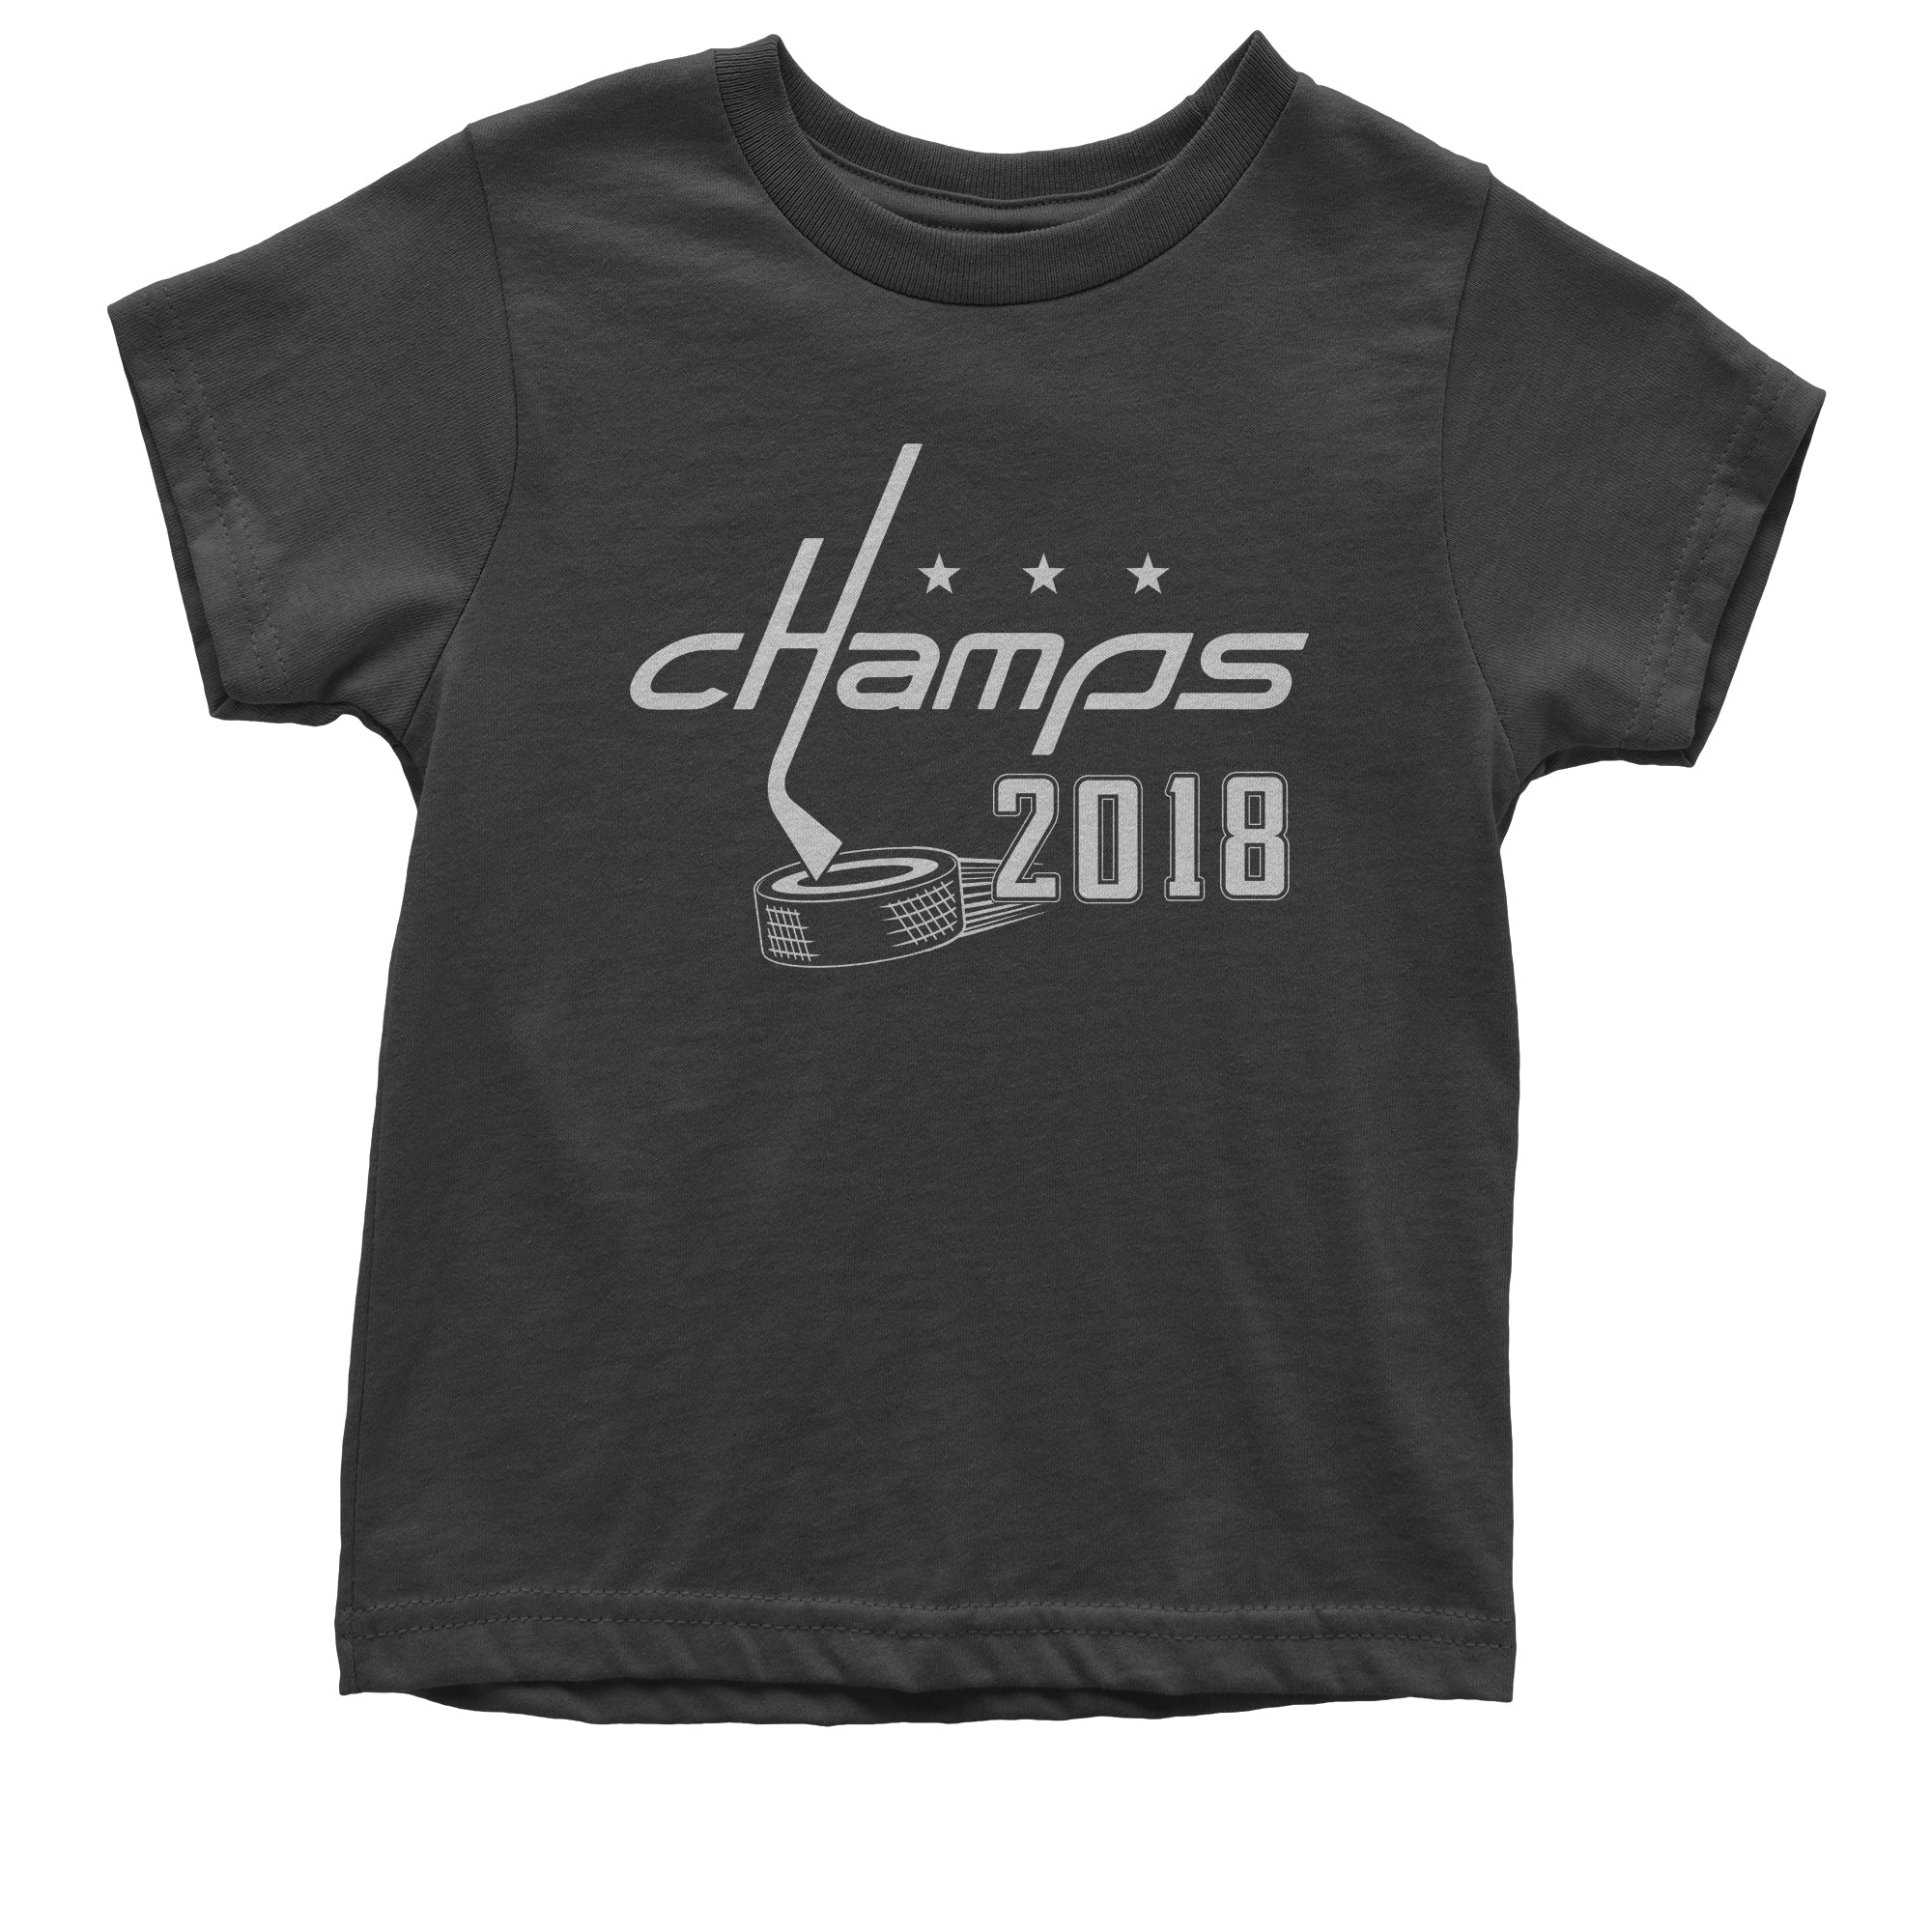 Allcaps Hockey 2018 Champs All Caps #Allcaps Cup Kid's T-Shirt